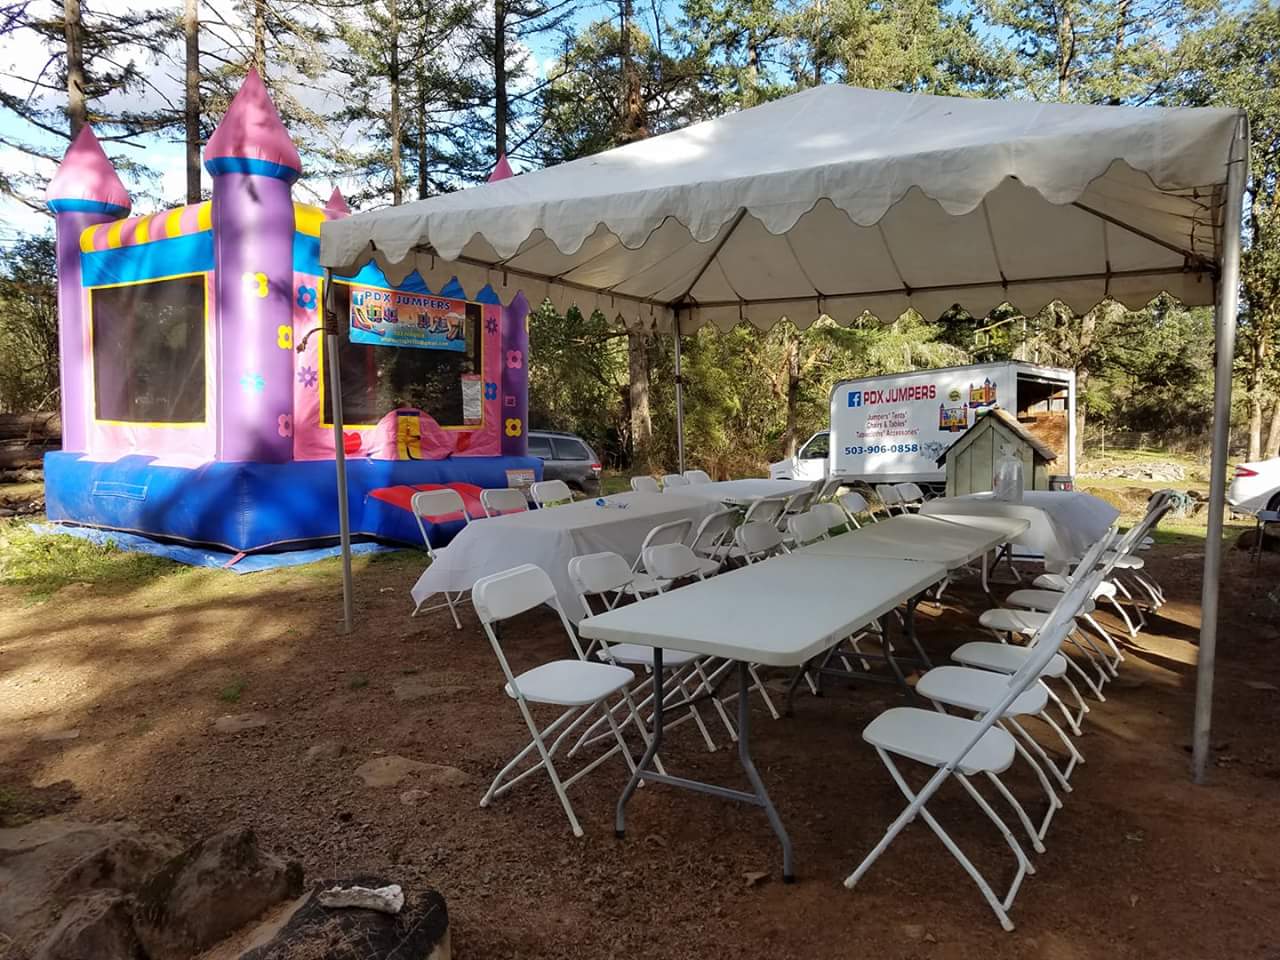 Pdxjumpers bouncer house - tent - tables and chairs combo